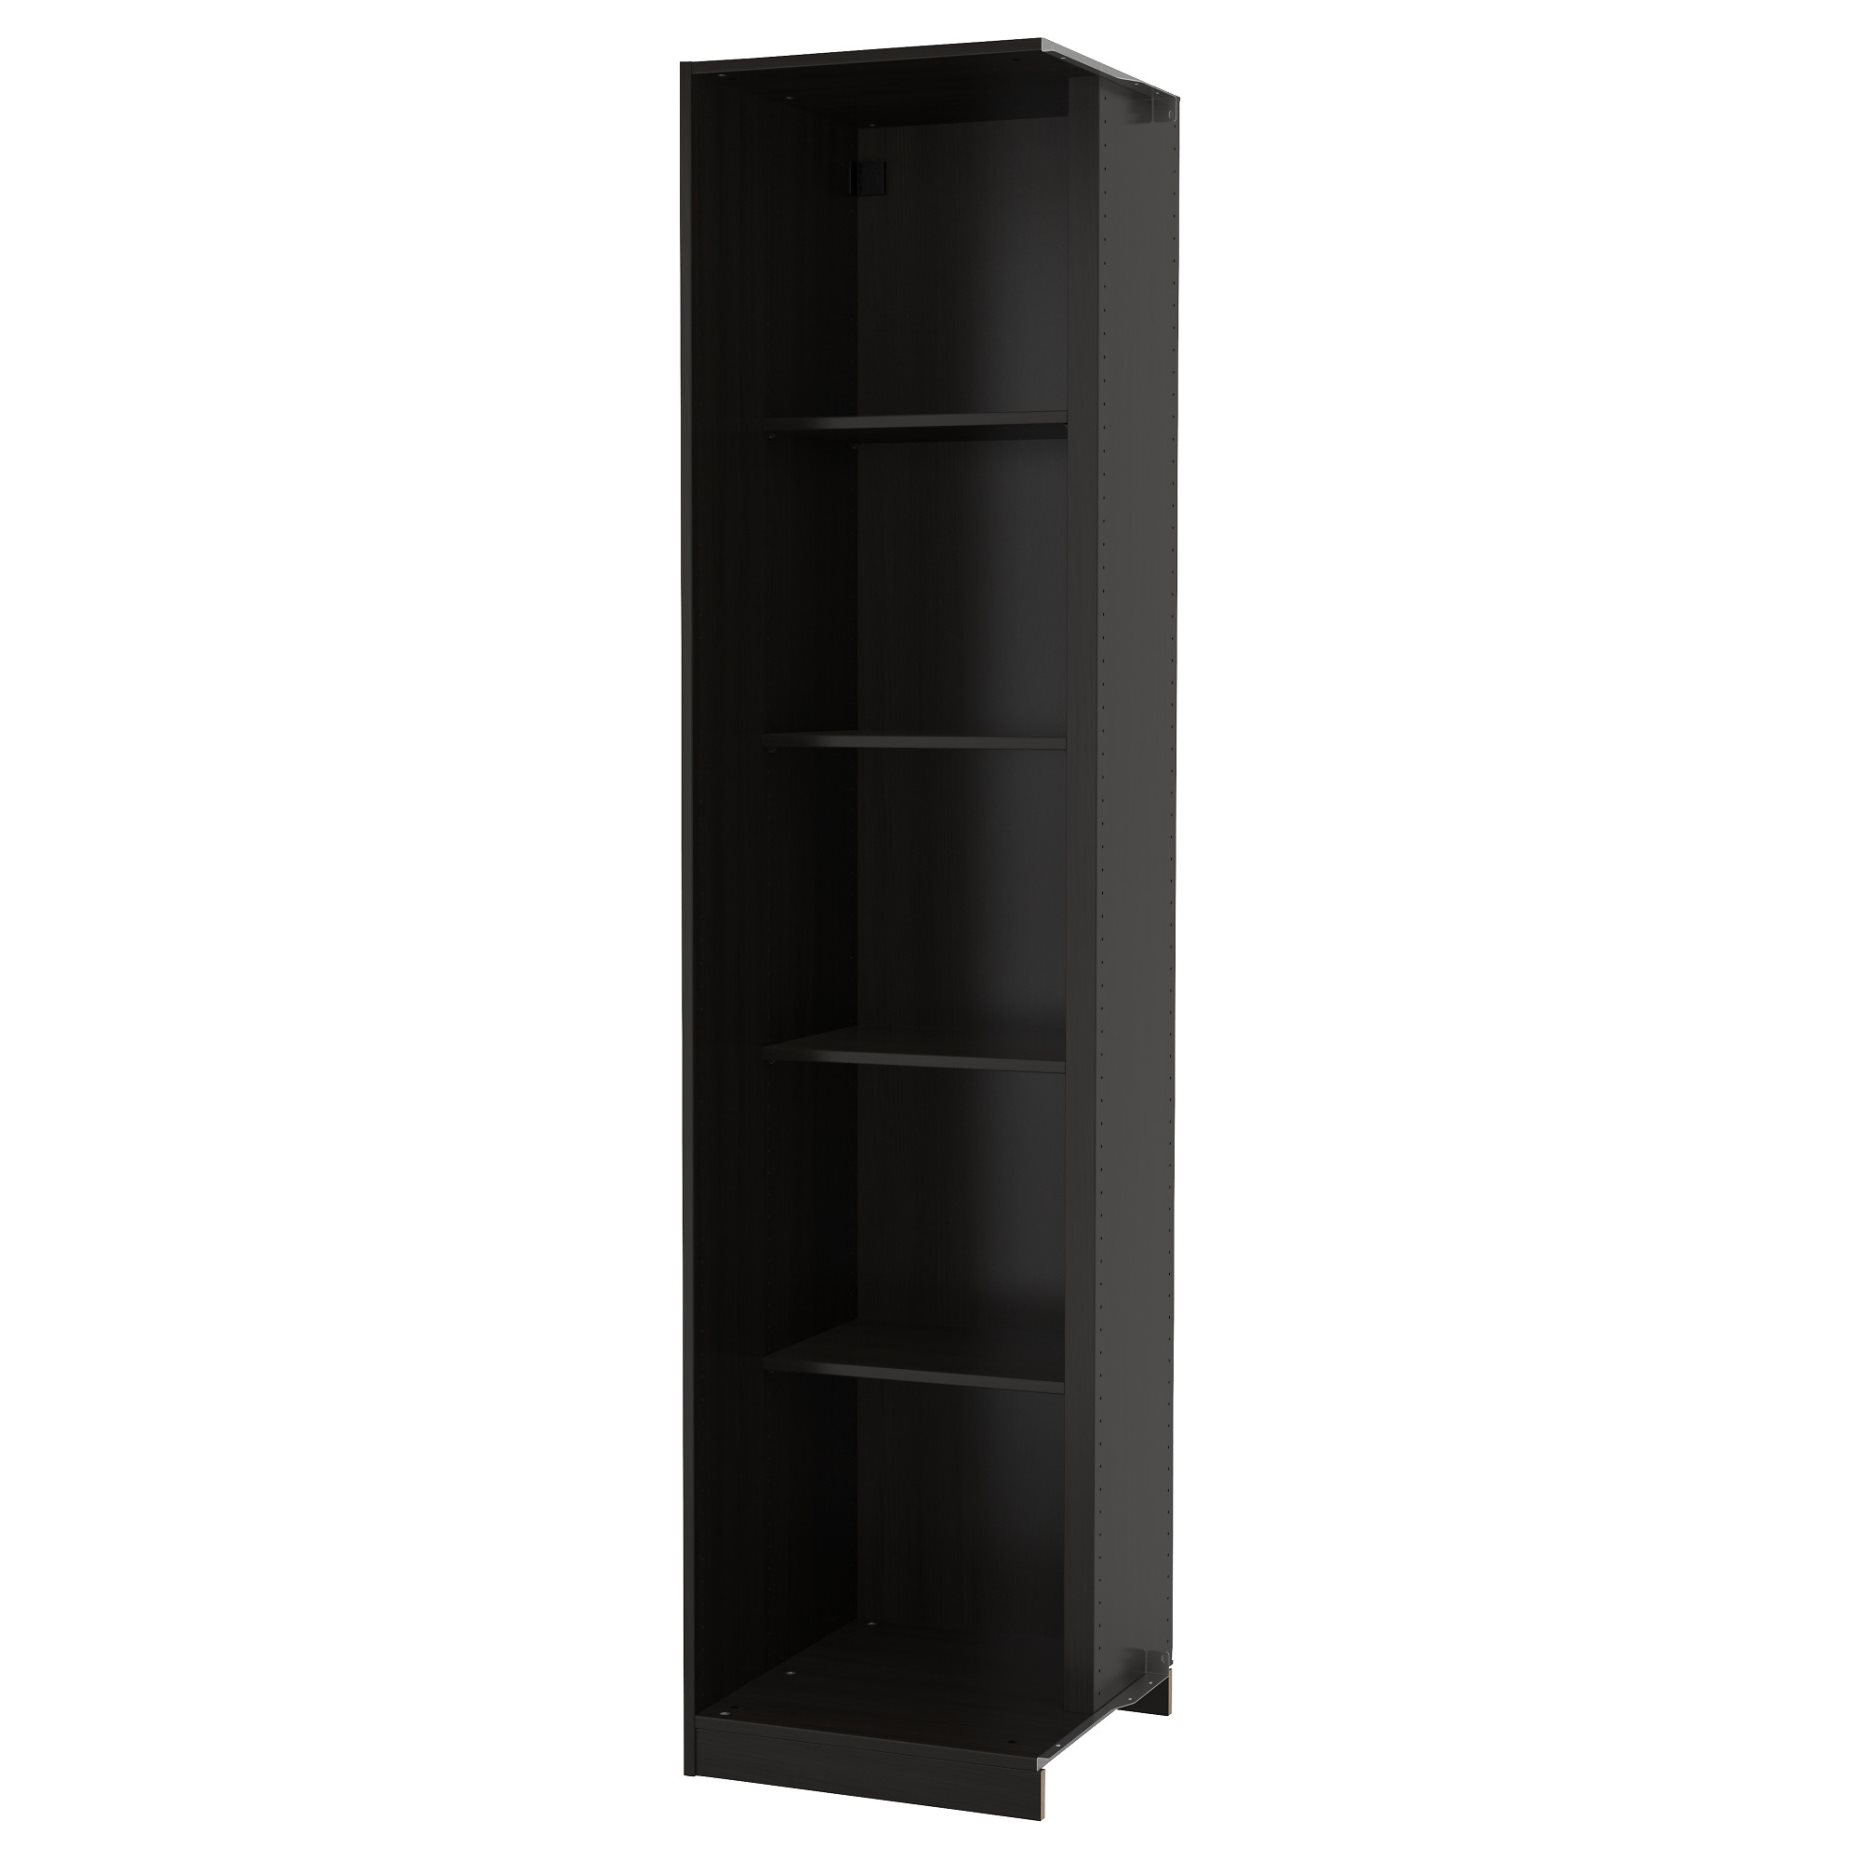 PAX, add-on corner unit with 4 shelves, 303.469.53